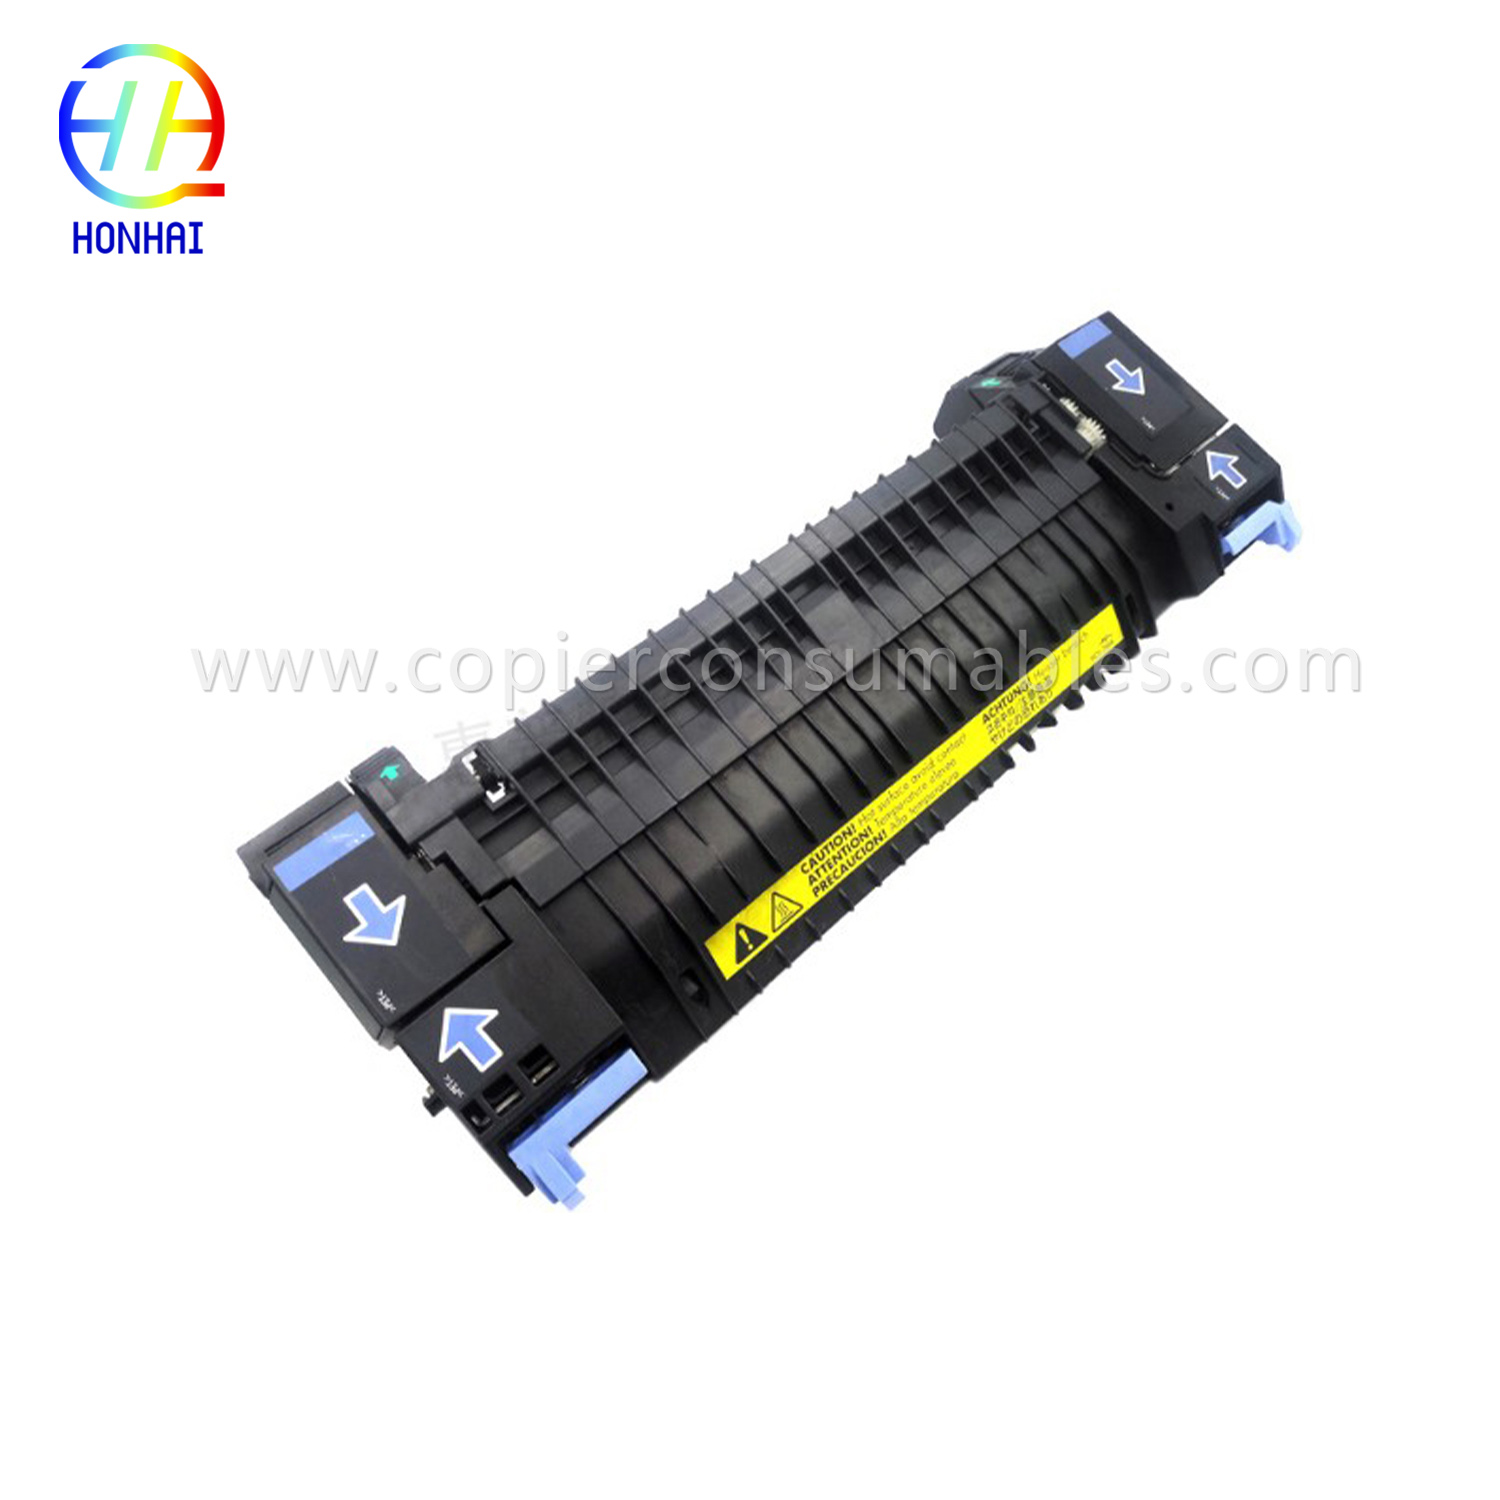 Fuser Assembly for HP Color LaserJet 2700 3000 3600 3800 CP3505 RM1-4348 RM1-2763 RM1-2665